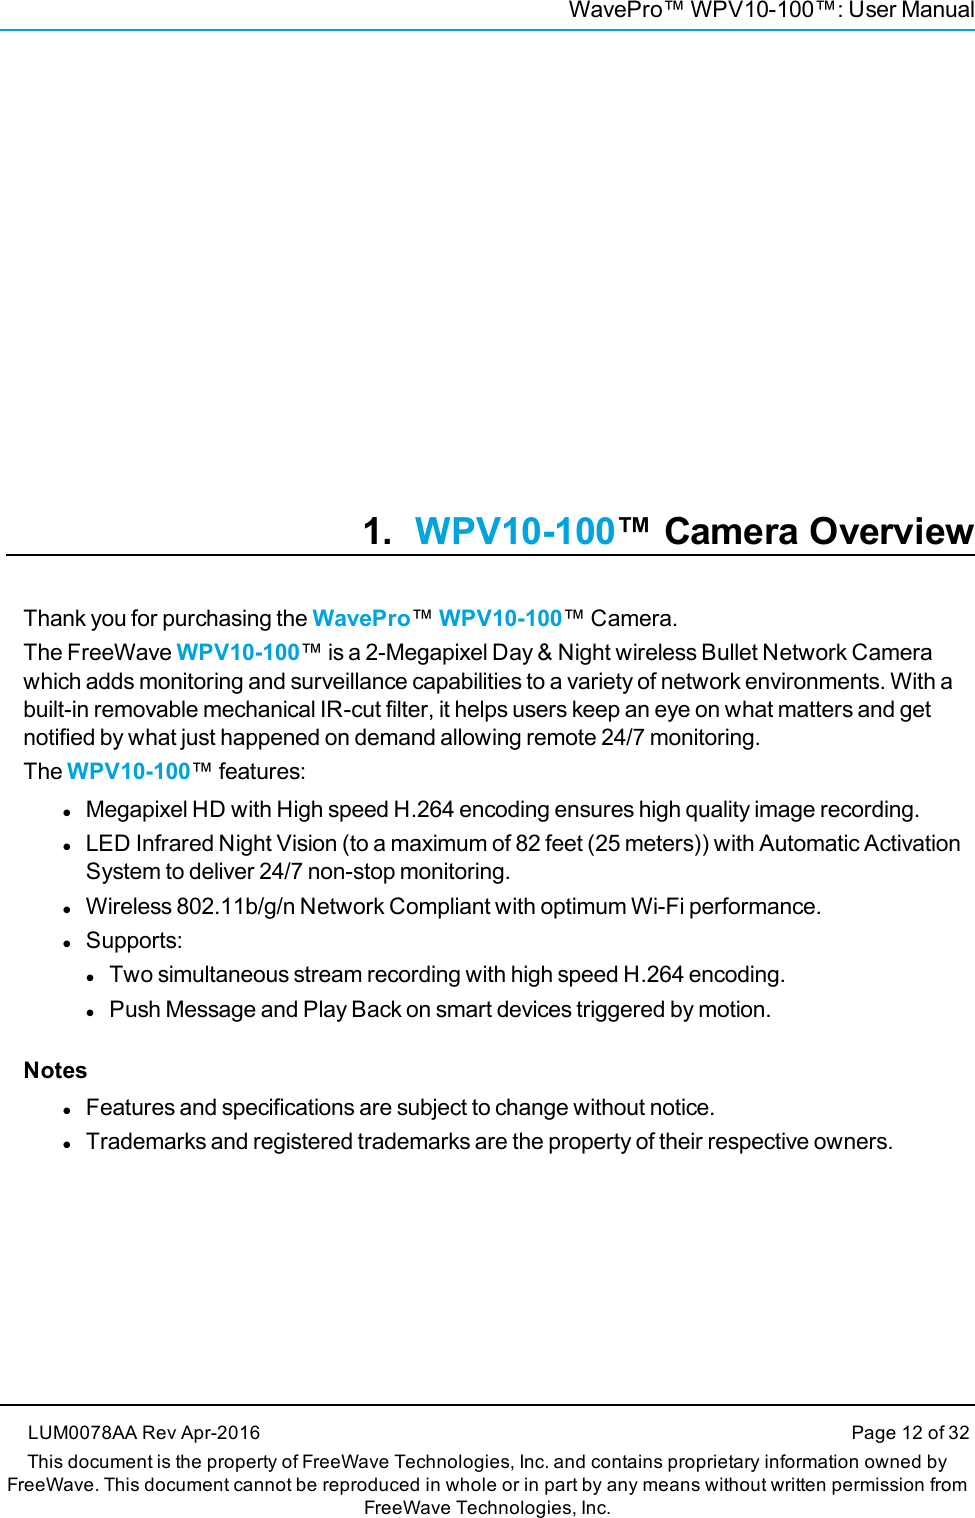 WavePro™ WPV10-100™: User Manual1. WPV10-100™ Camera OverviewThank you for purchasing the WavePro™WPV10-100™ Camera.The FreeWave WPV10-100™ is a 2-Megapixel Day &amp; Night wireless Bullet Network Camerawhich adds monitoring and surveillance capabilities to a variety of network environments. With abuilt-in removable mechanical IR-cut filter, it helps users keep an eye on what matters and getnotified by what just happened on demand allowing remote 24/7 monitoring.The WPV10-100™ features:lMegapixel HD with High speed H.264 encoding ensures high quality image recording.lLED Infrared Night Vision (to a maximum of 82 feet (25 meters)) with Automatic ActivationSystem to deliver 24/7 non-stop monitoring.lWireless 802.11b/g/n Network Compliant with optimum Wi-Fi performance.lSupports:lTwo simultaneous stream recording with high speed H.264 encoding.lPush Message and Play Back on smart devices triggered by motion.NoteslFeatures and specifications are subject to change without notice.lTrademarks and registered trademarks are the property of their respective owners.LUM0078AA Rev Apr-2016 Page 12 of 32This document is the property of FreeWave Technologies, Inc. and contains proprietary information owned byFreeWave. This document cannot be reproduced in whole or in part by any means without written permission fromFreeWave Technologies, Inc.